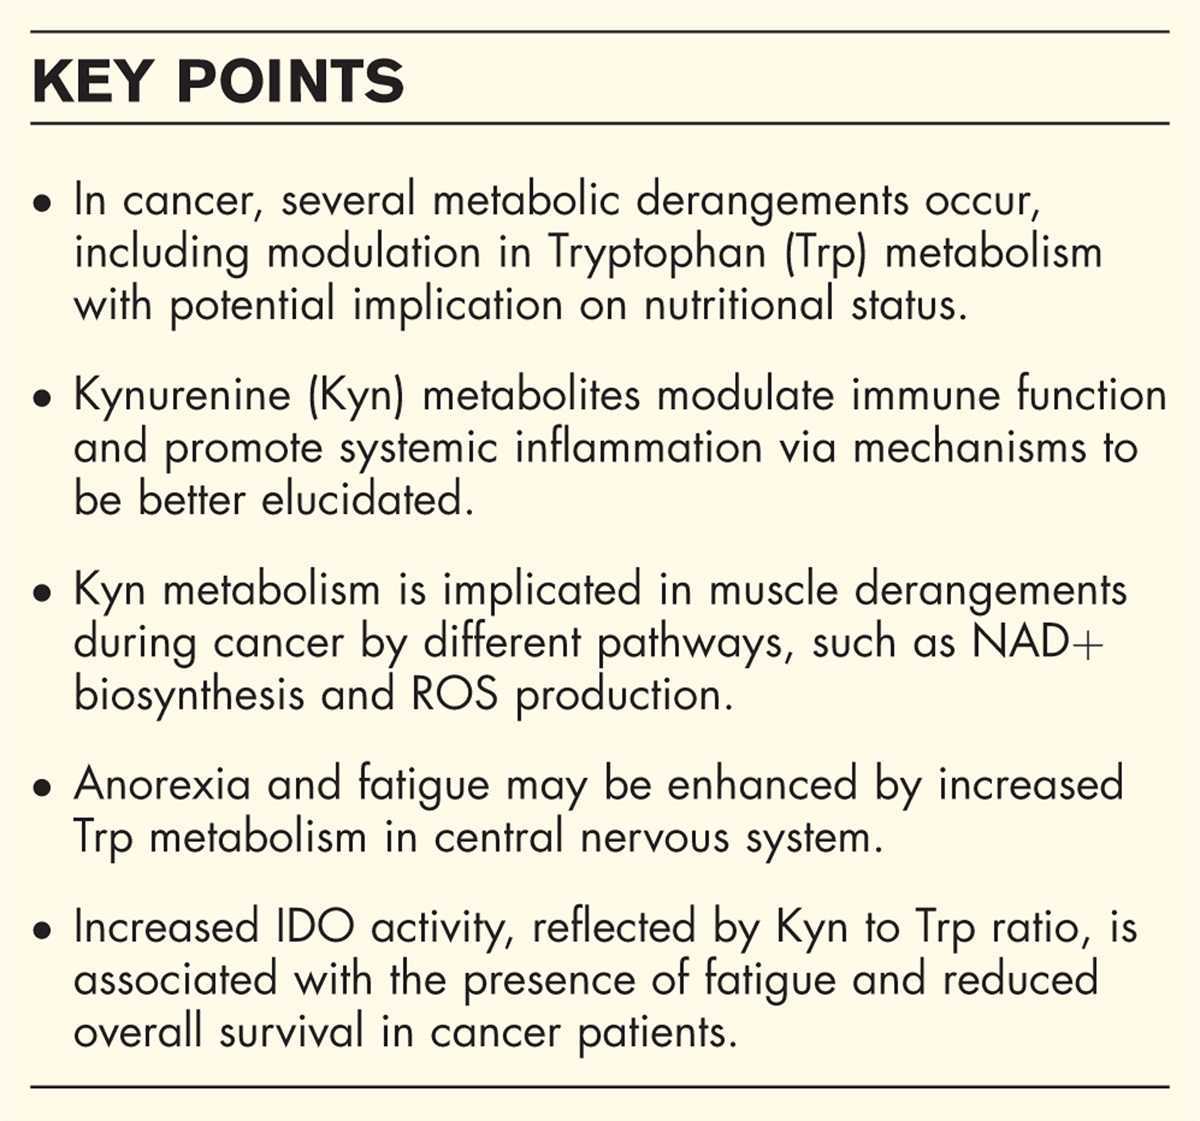 Tryptophan metabolism and kynurenine metabolites in cancer: systemic nutritional and metabolic implications